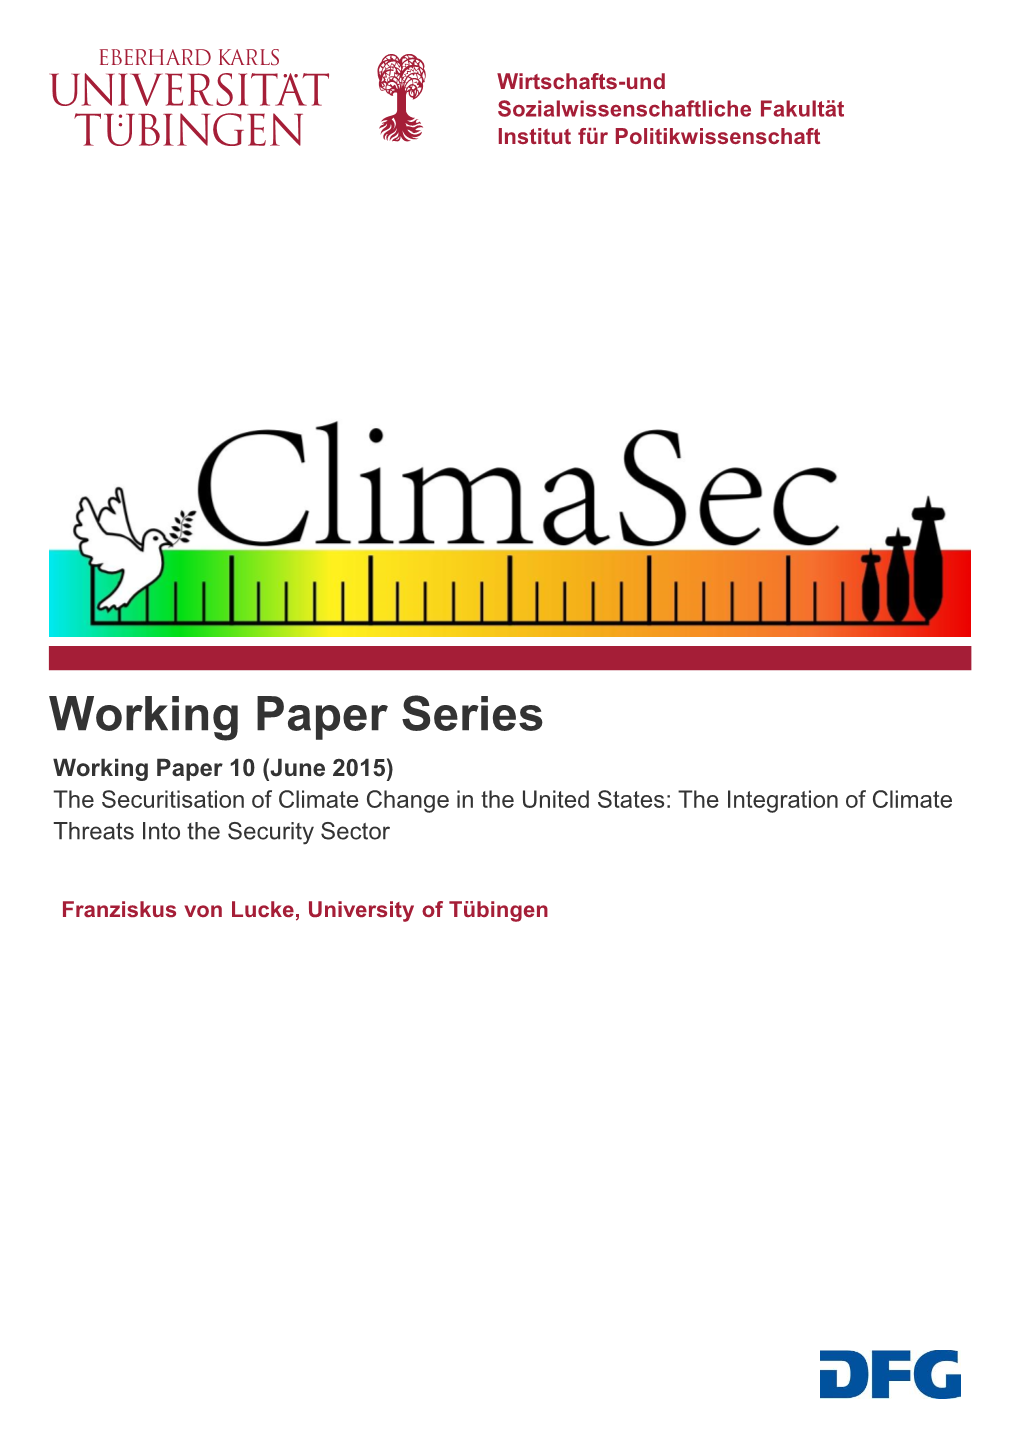 The Securitisation of Climate Change in the United States: the Integration of Climate Threats Into the Security Sector